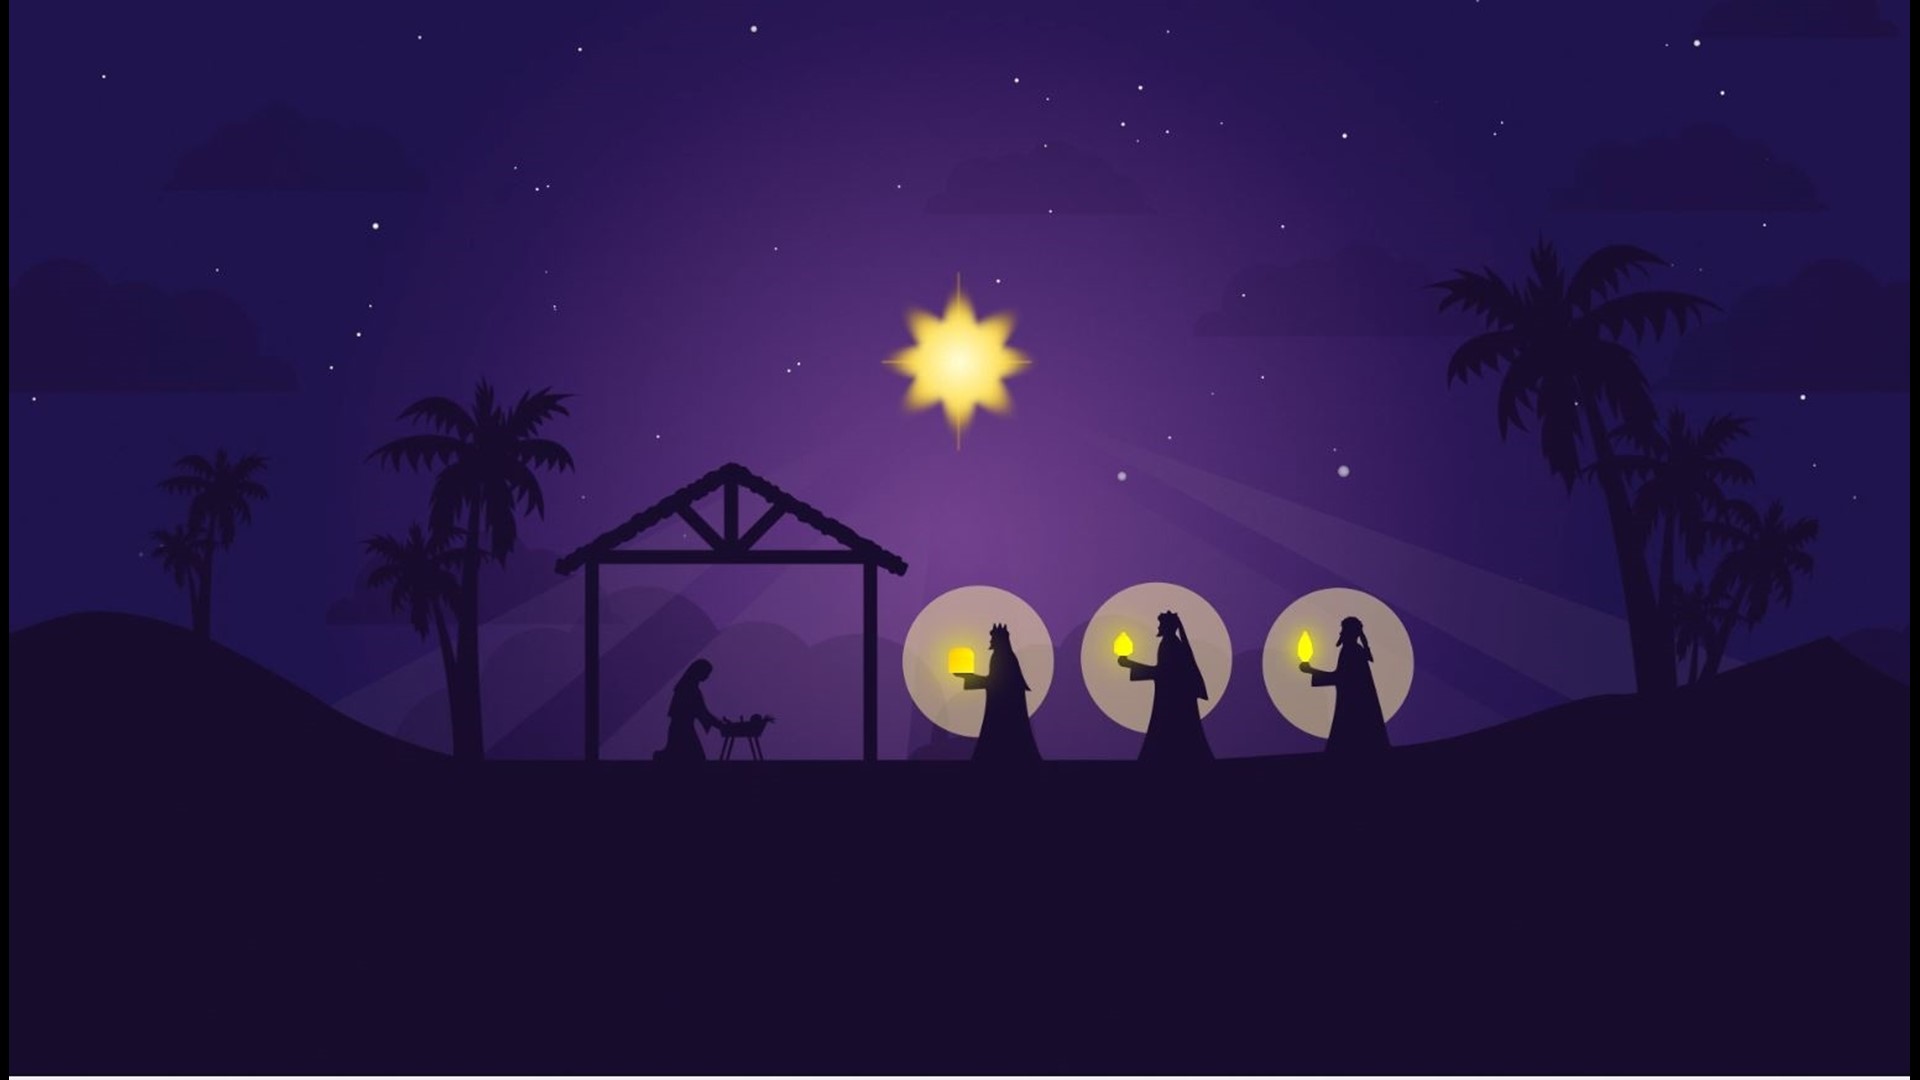 January 6 marks the Epiphany, also known as Three Kings Day. This is a video loop to mark the Christian holiday.